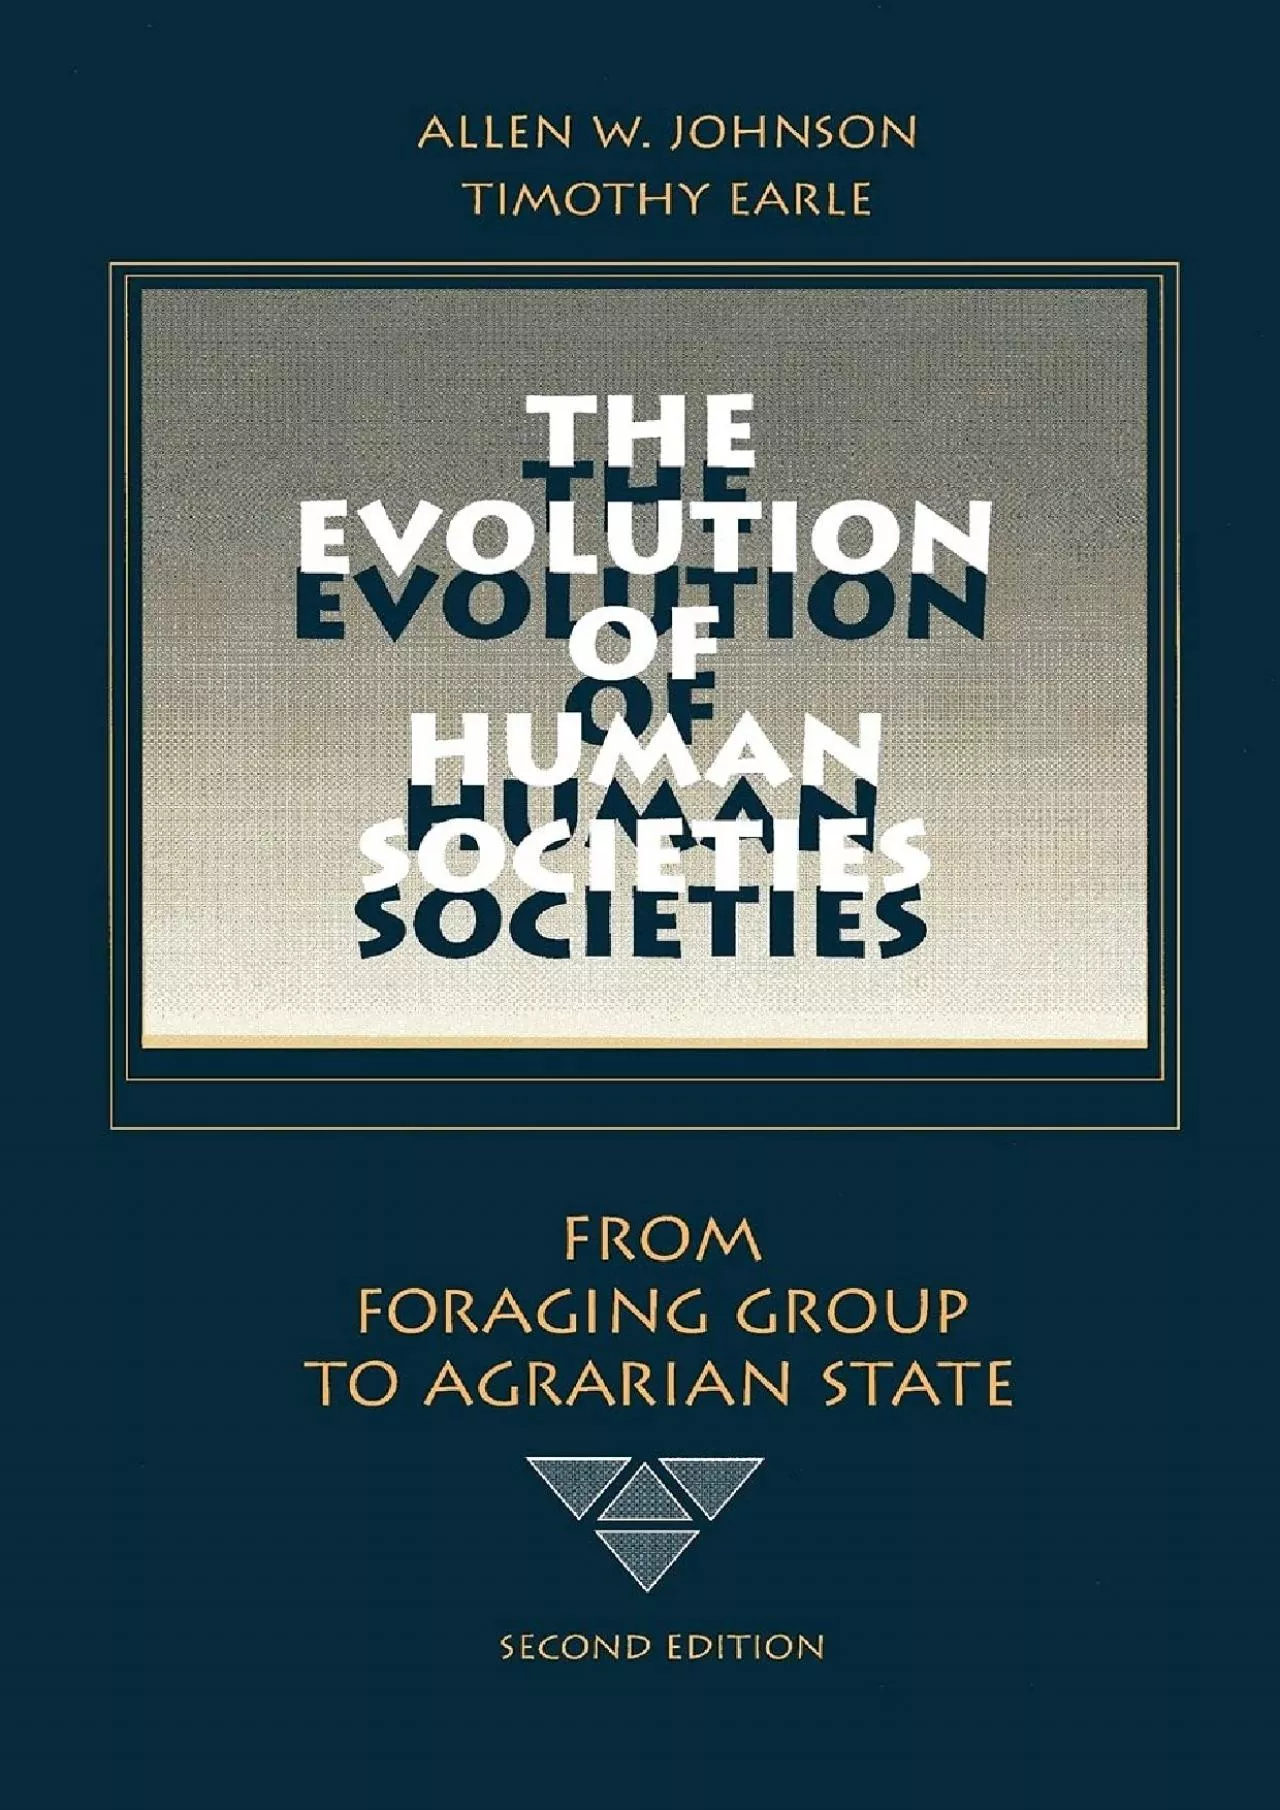 (BOOK)-The Evolution of Human Societies: From Foraging Group to Agrarian State, Second